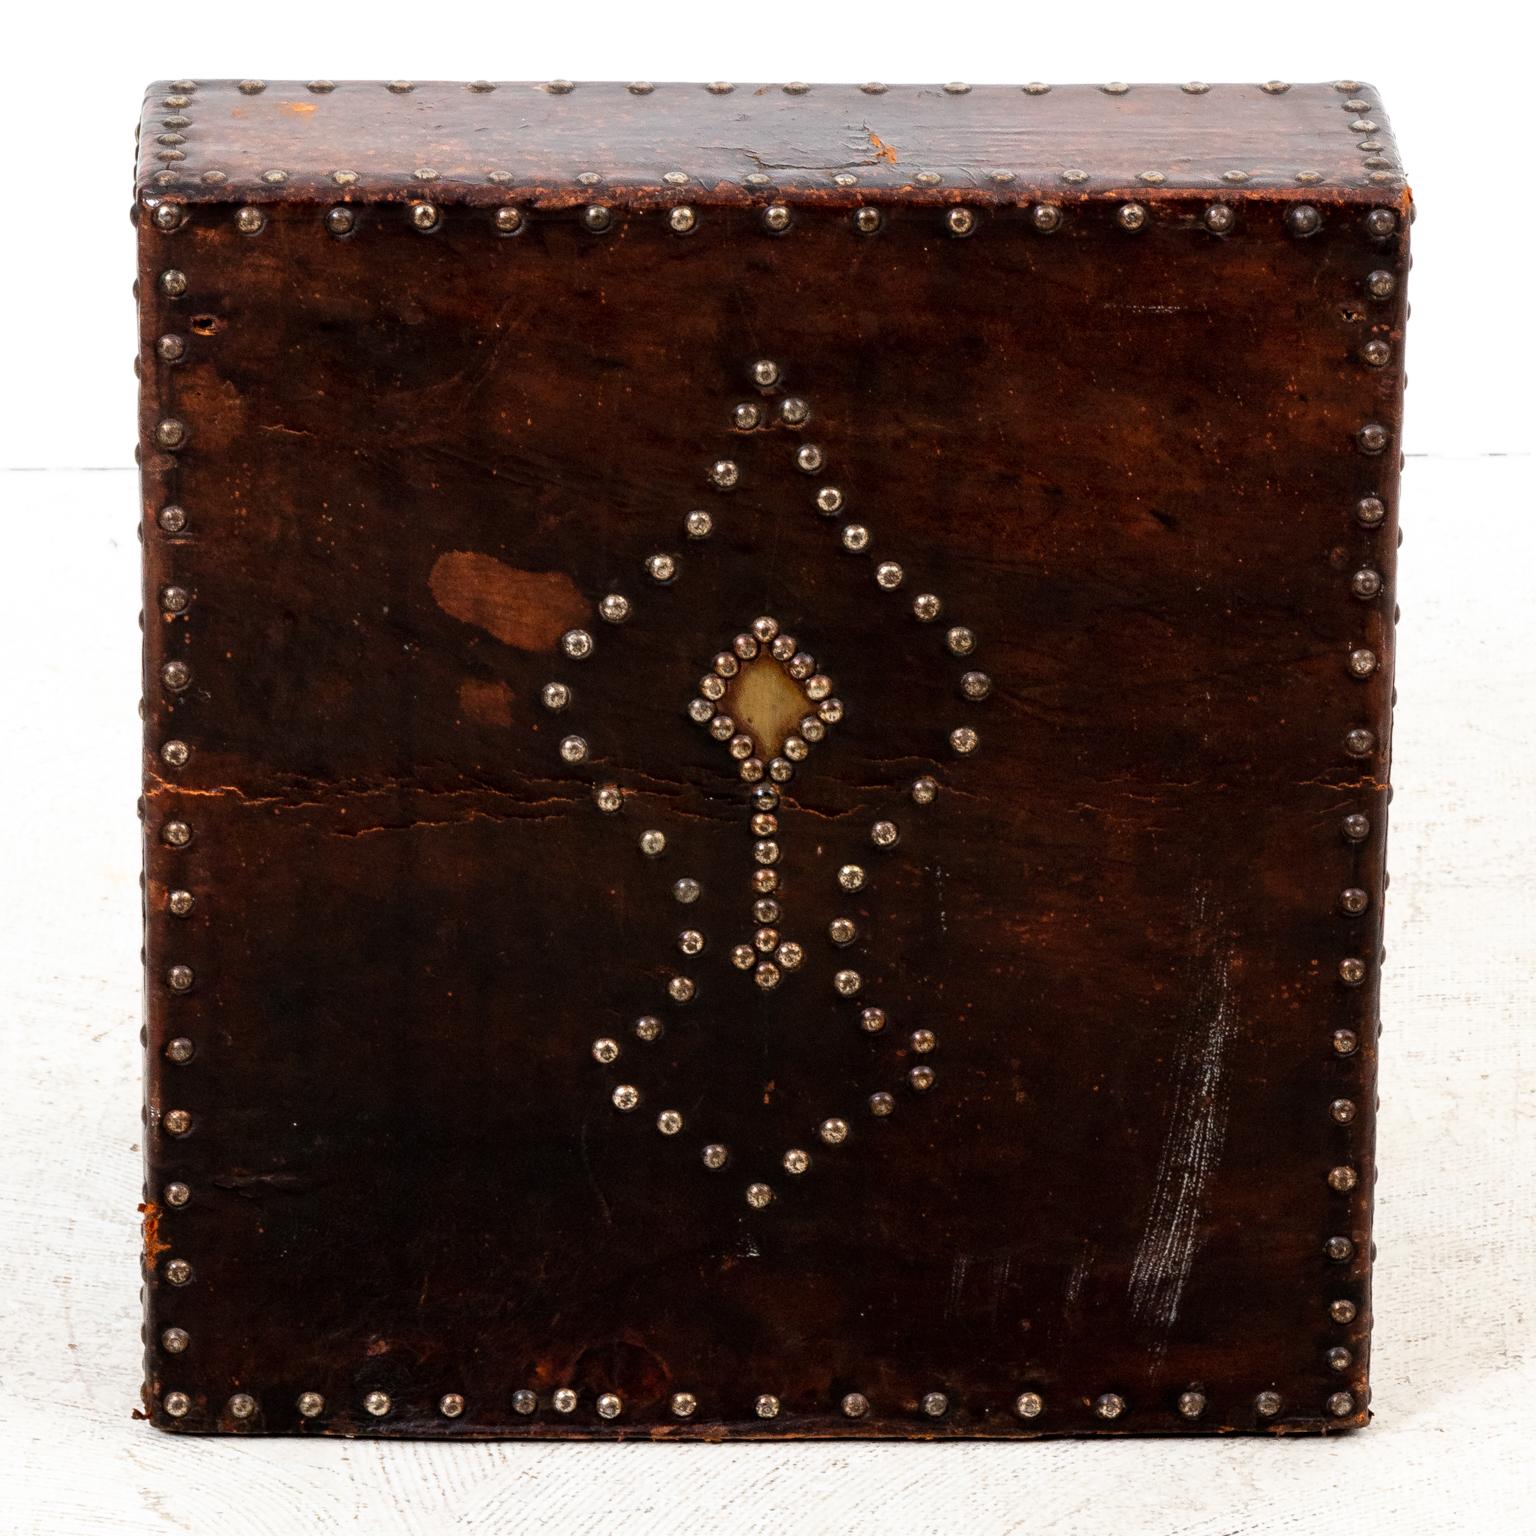 Spanish Leather and Nail Head Decorated Letter Box from Spain